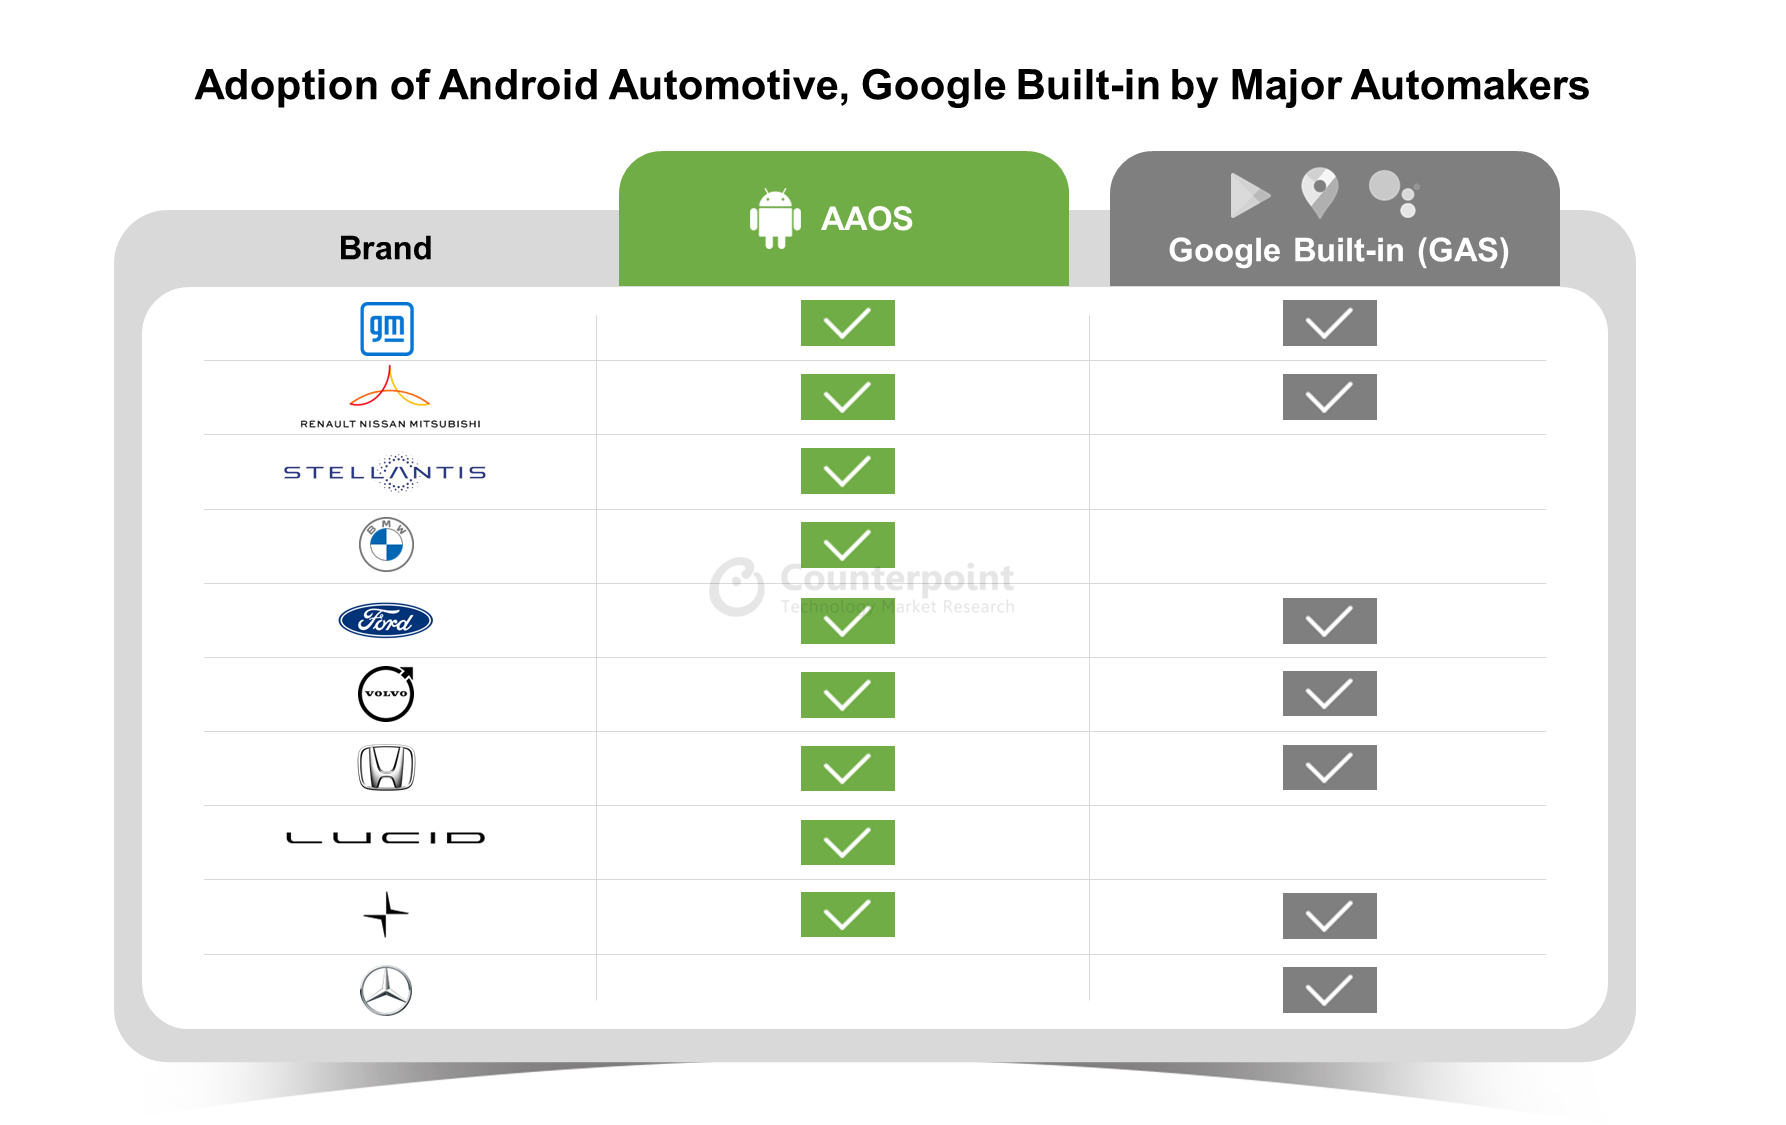 Google built-in by major automakers